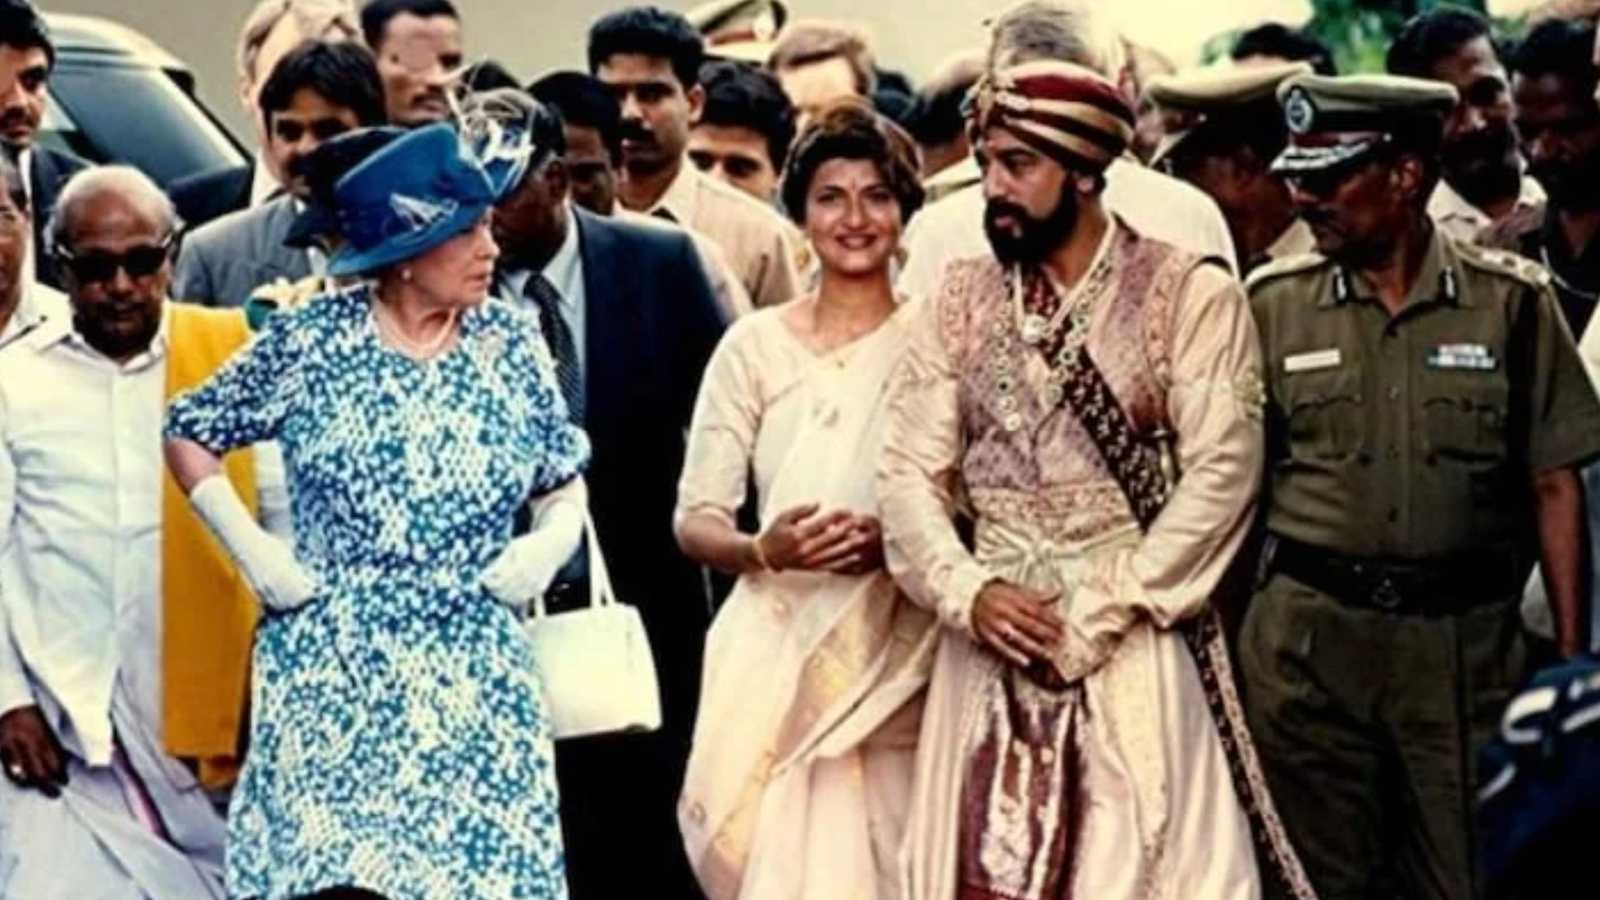 The Indian film set Queen Elizabeth II visited to show her 'no colonialism' stand in 1997